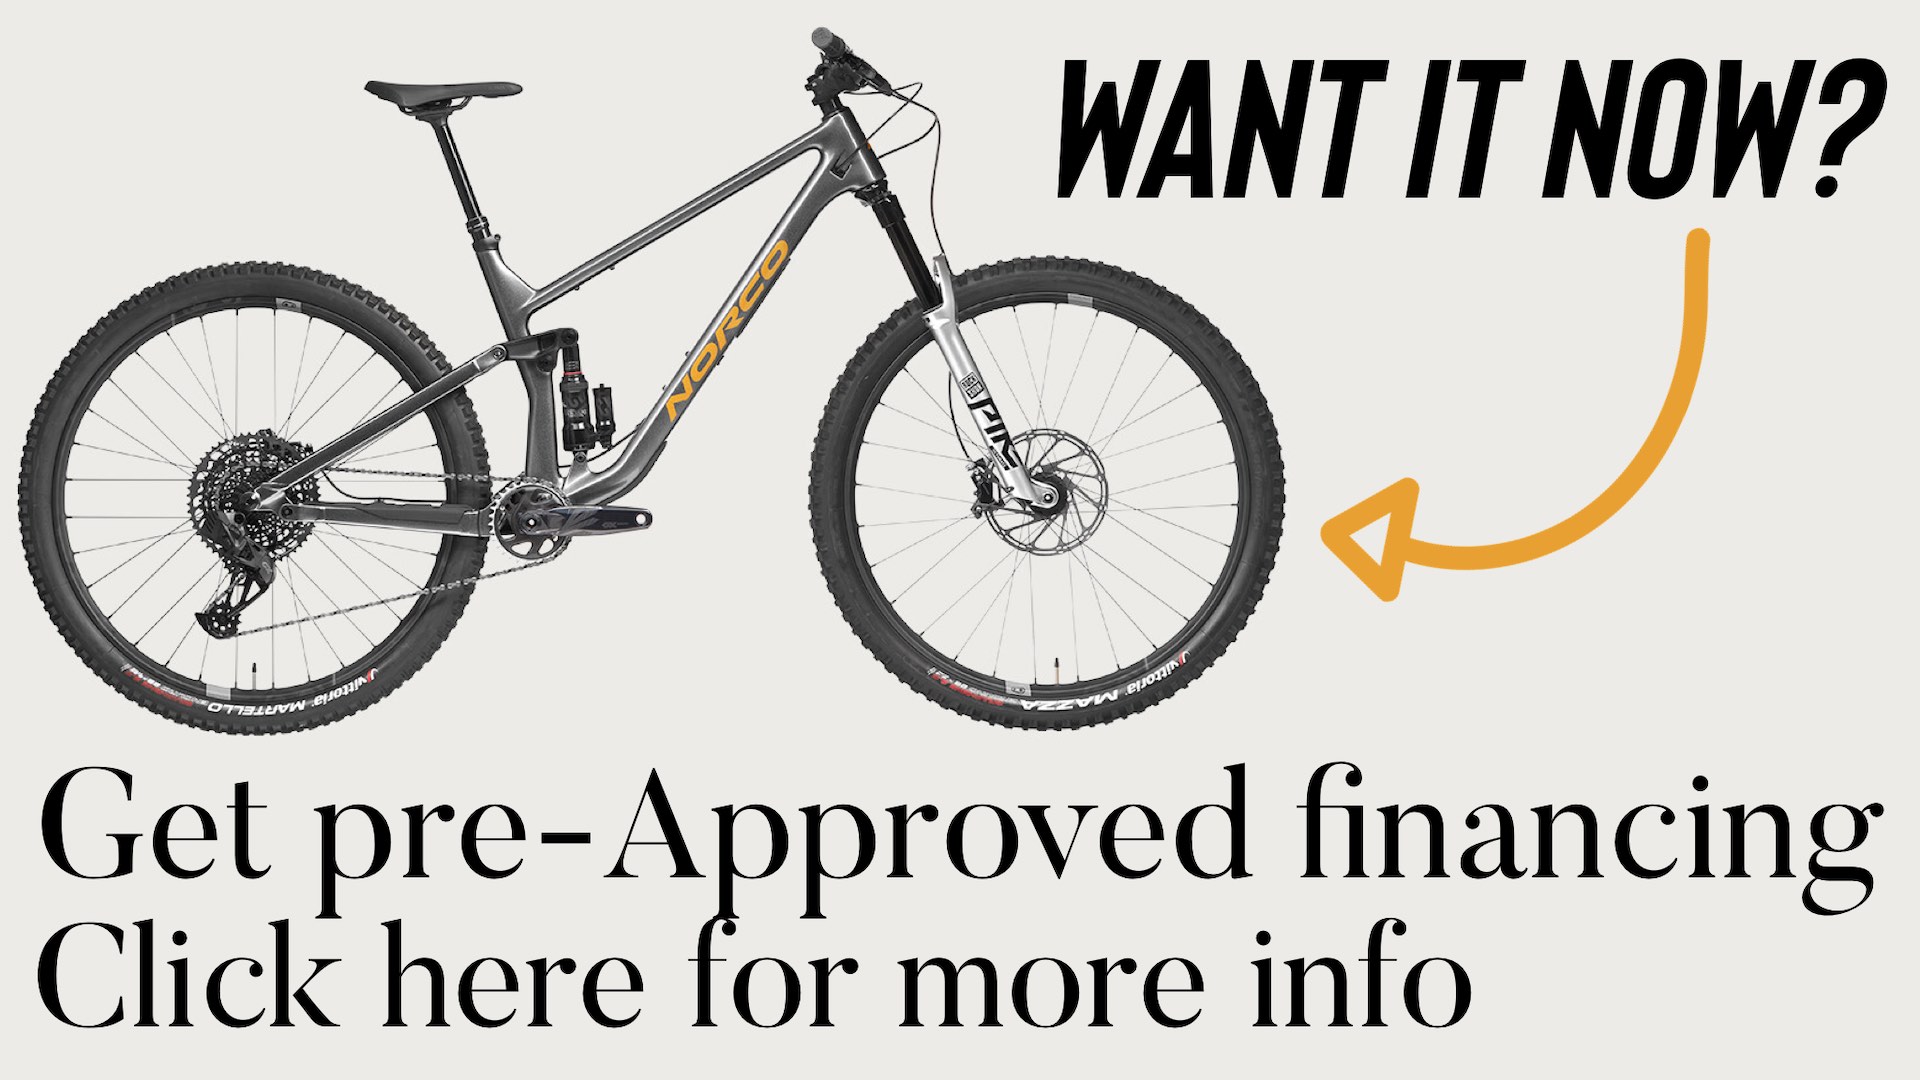 Want a bike now? Get pre-approved financing. Click here for more info.